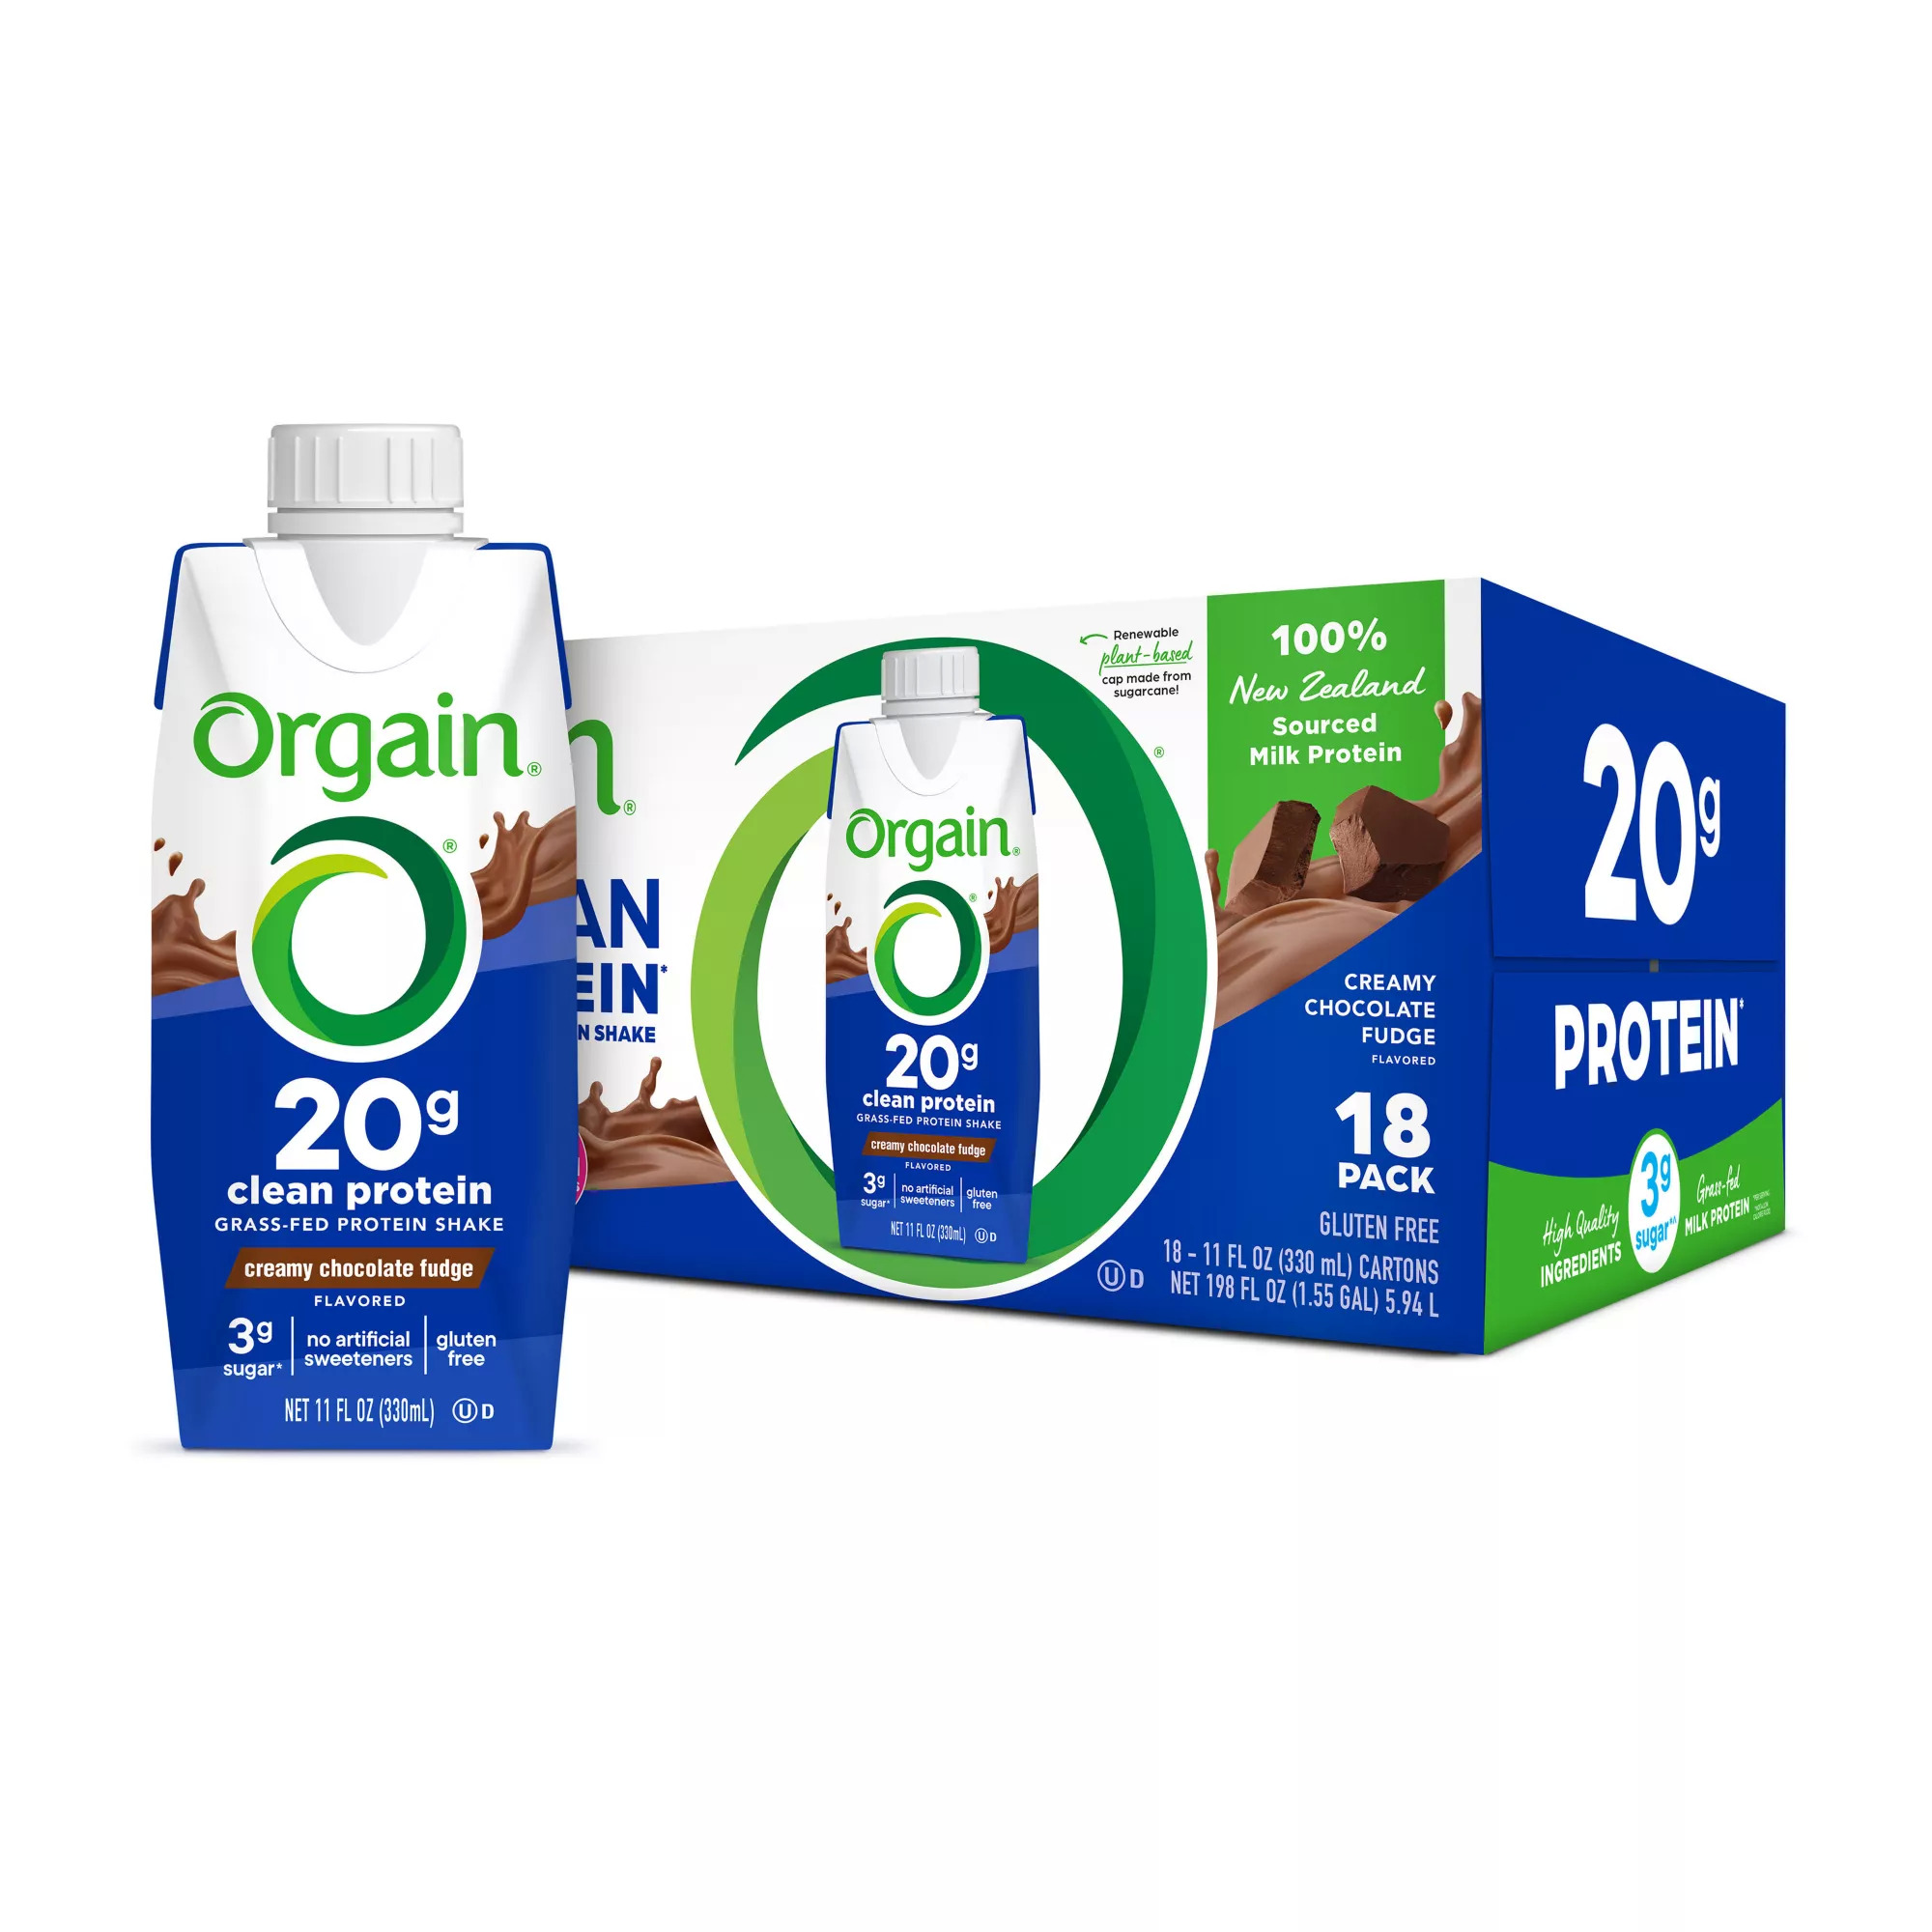 Orgain Clean Protein 11oz shakes - 18 pack - $8.98 after coupon YMMV